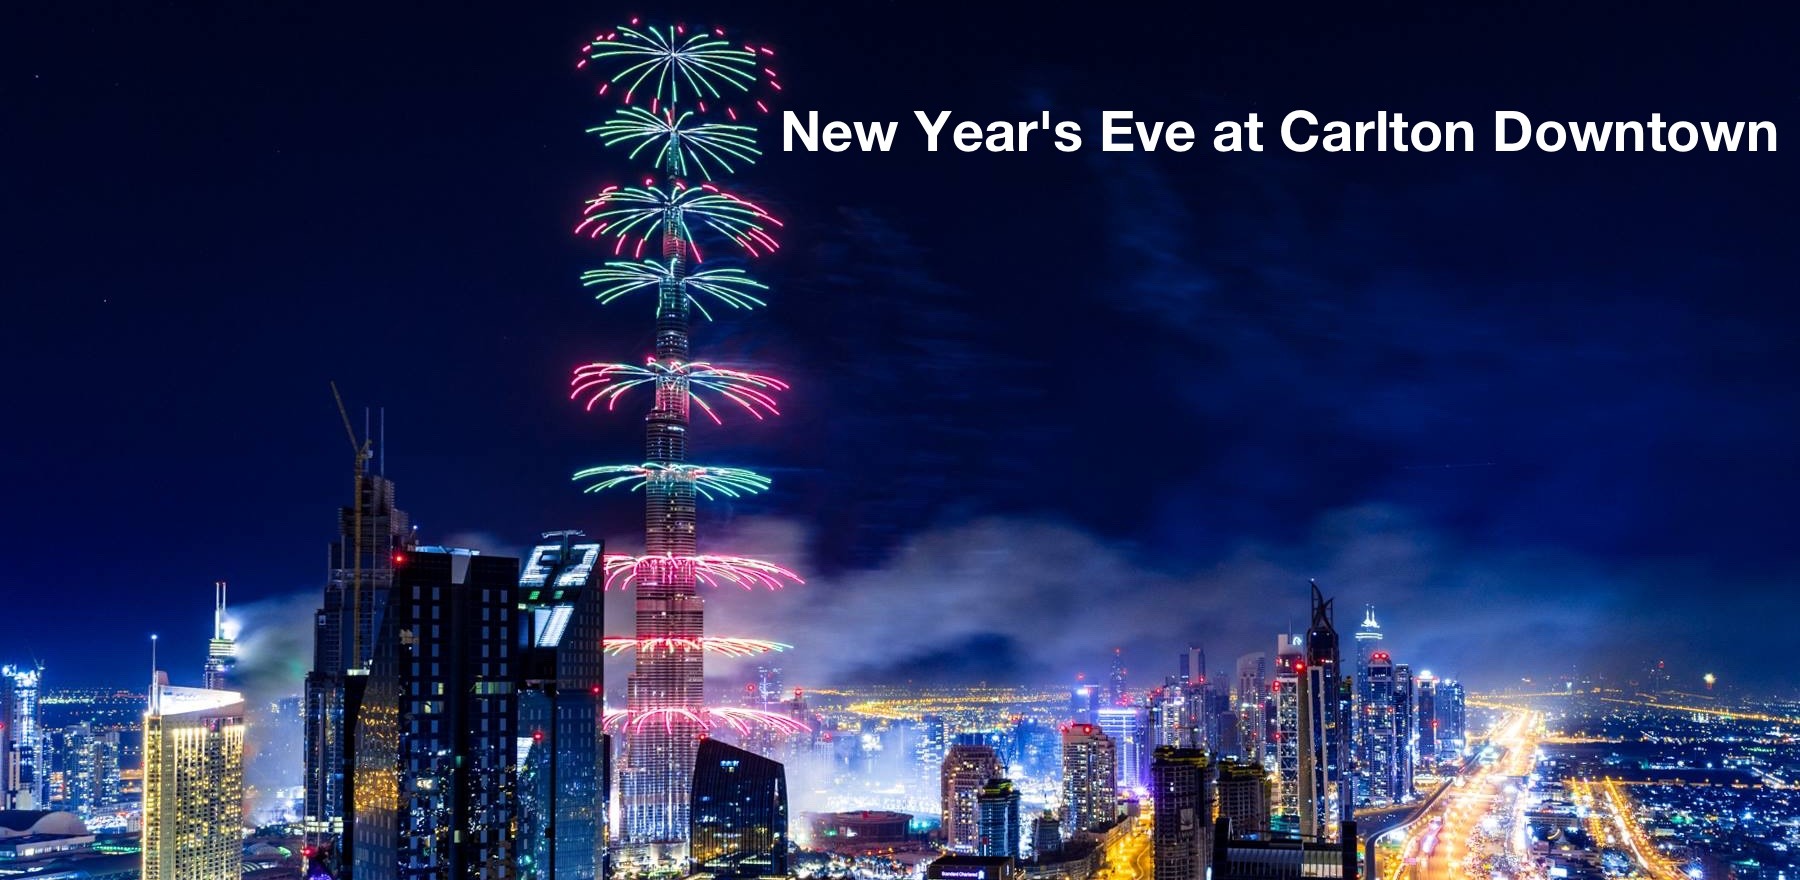 New Year’s Eve at Carlton Downtown - Coming Soon in UAE